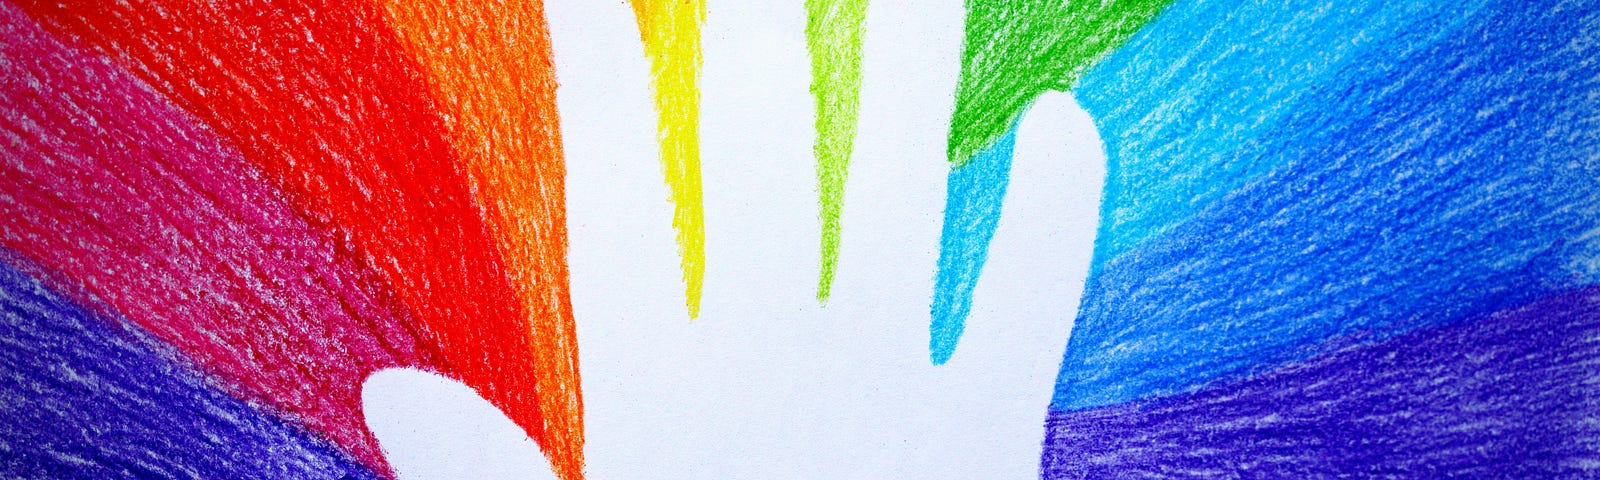 Photo of a radiant color wheel with a hand waving in the middle.